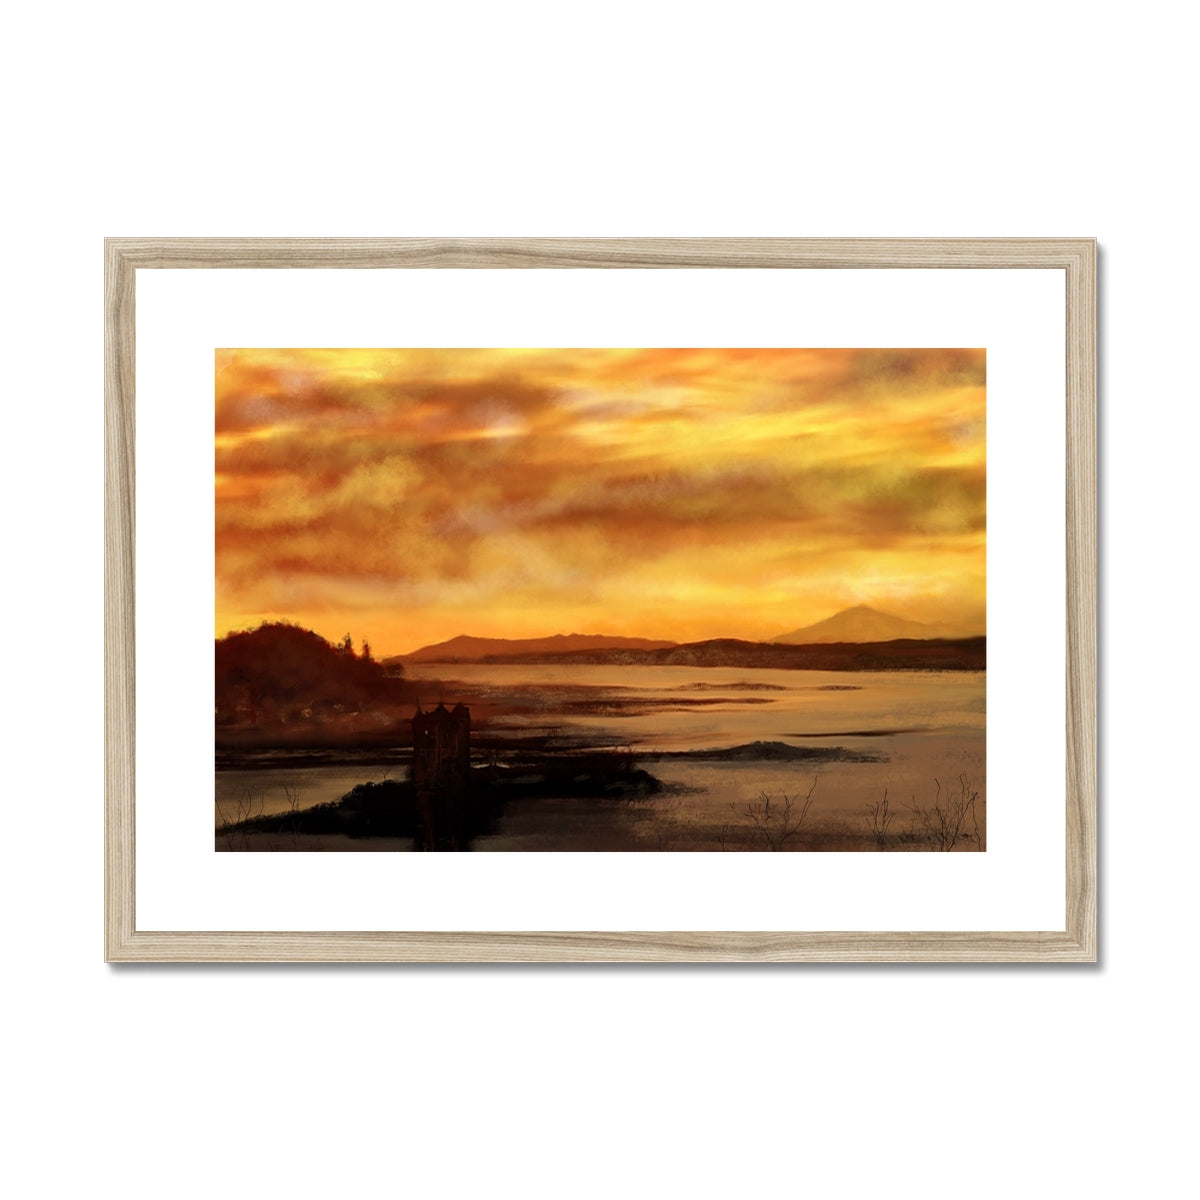 Castle Stalker Dusk Painting | Framed & Mounted Prints From Scotland-Framed & Mounted Prints-Historic & Iconic Scotland Art Gallery-A2 Landscape-Natural Frame-Paintings, Prints, Homeware, Art Gifts From Scotland By Scottish Artist Kevin Hunter